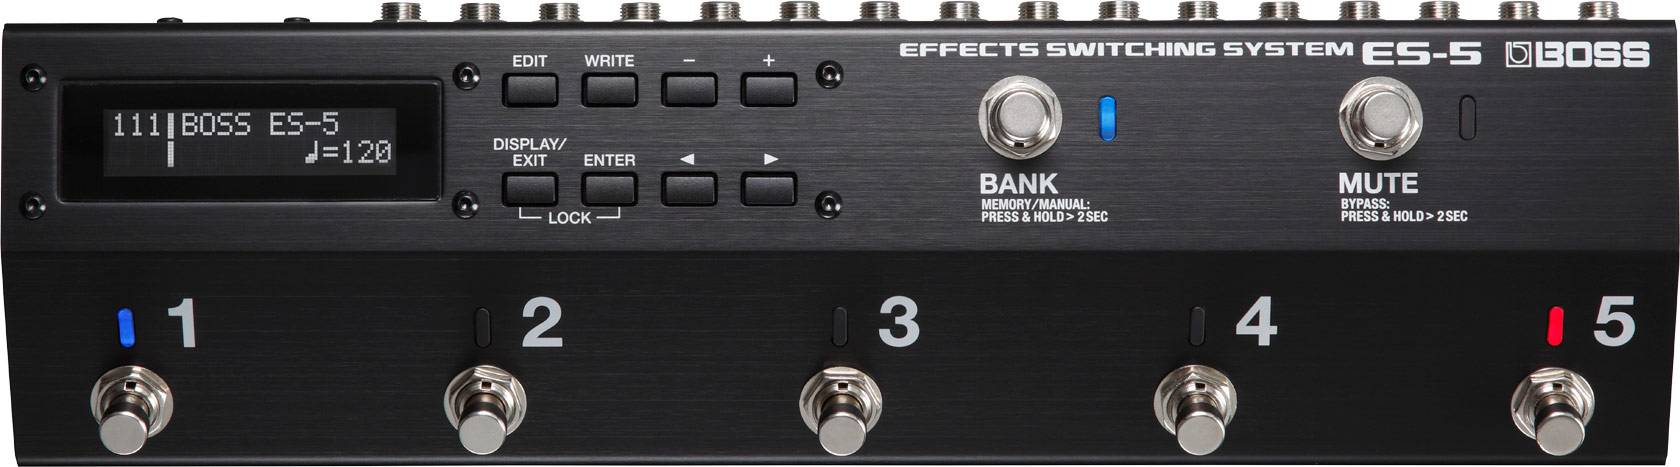 BOSS ES-5 Effect Switching System Pedalboard